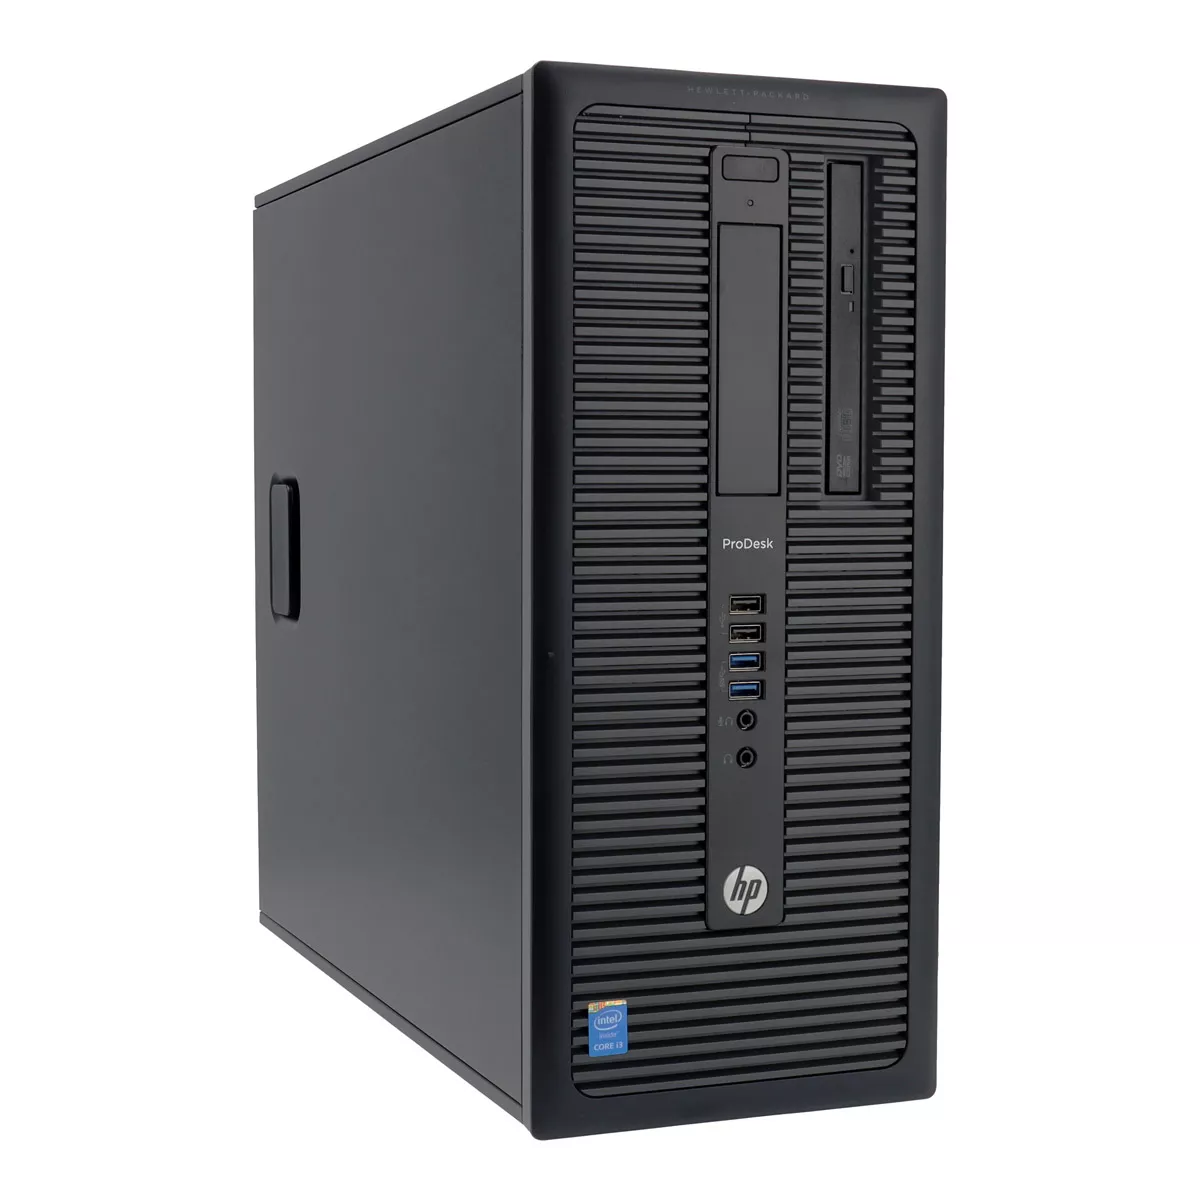 HP ProDesk 600 G1 Tower Core i3 4130 3,4 GHz 4 GB 500 GB A+